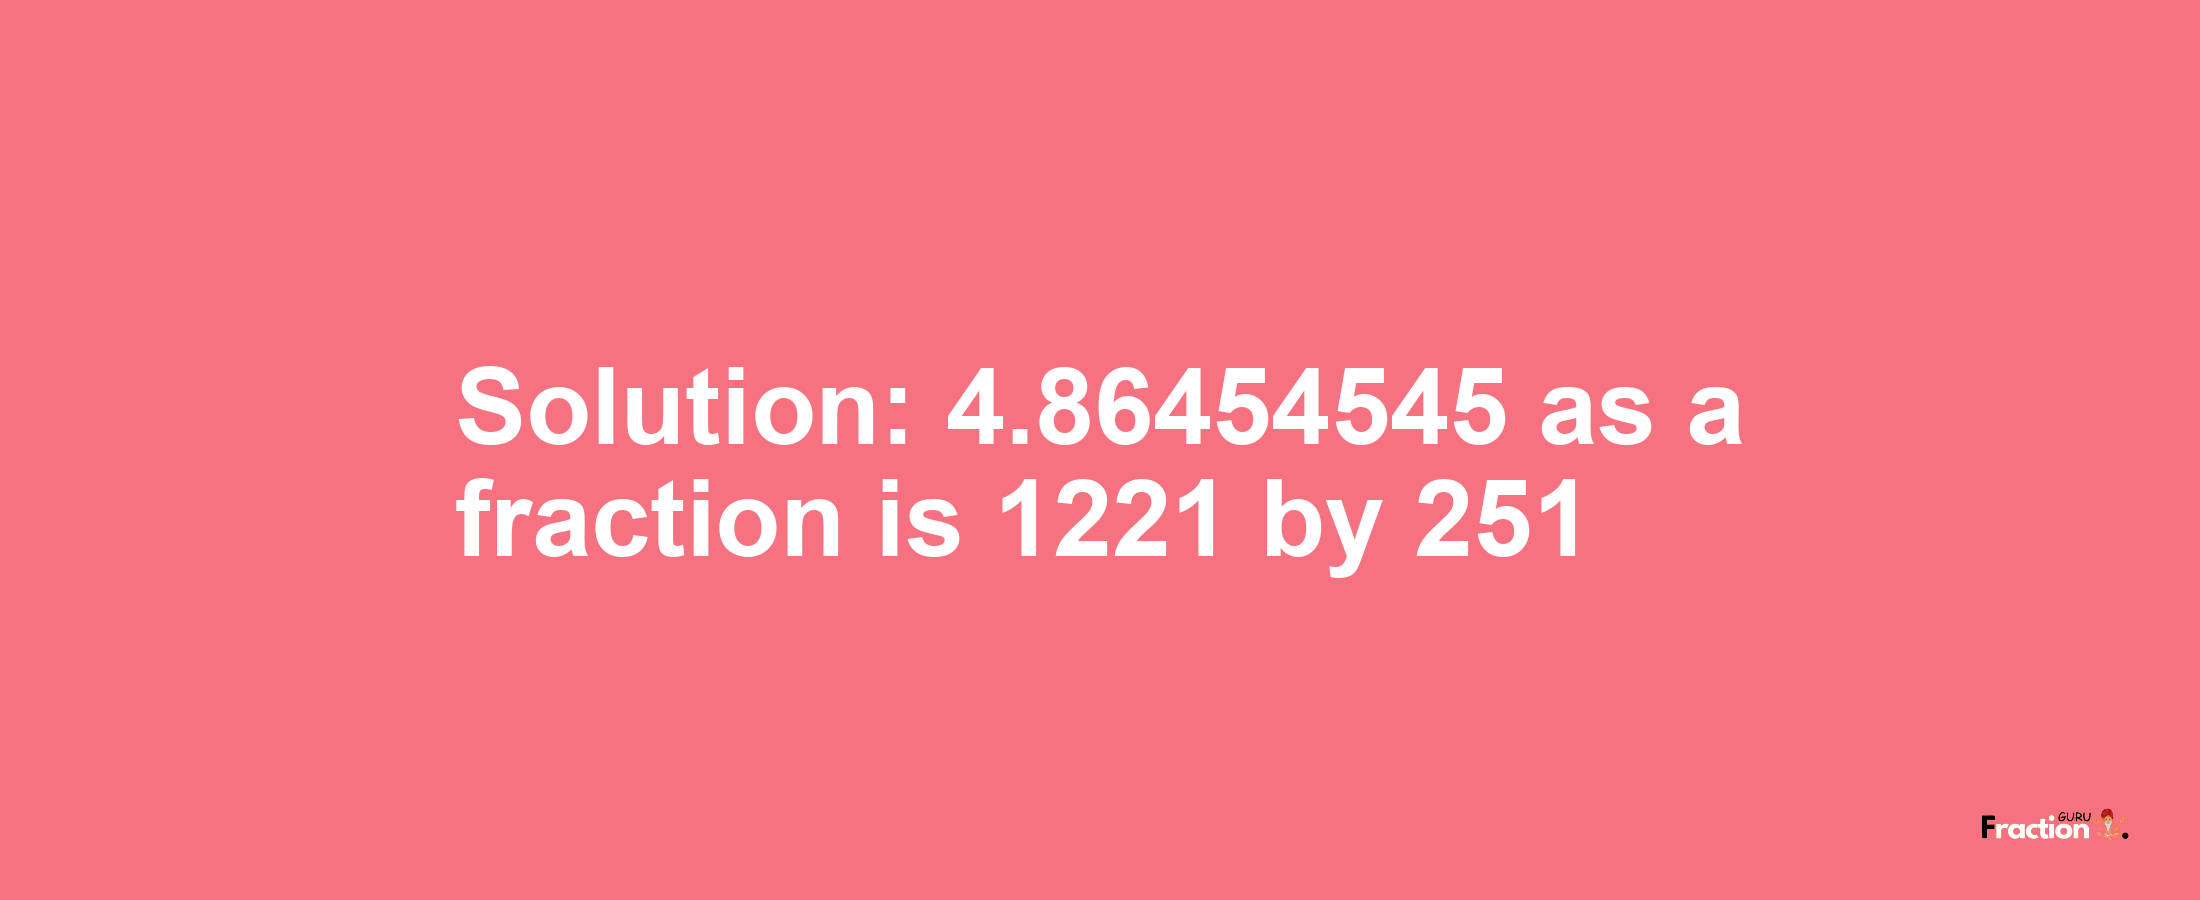 Solution:4.86454545 as a fraction is 1221/251